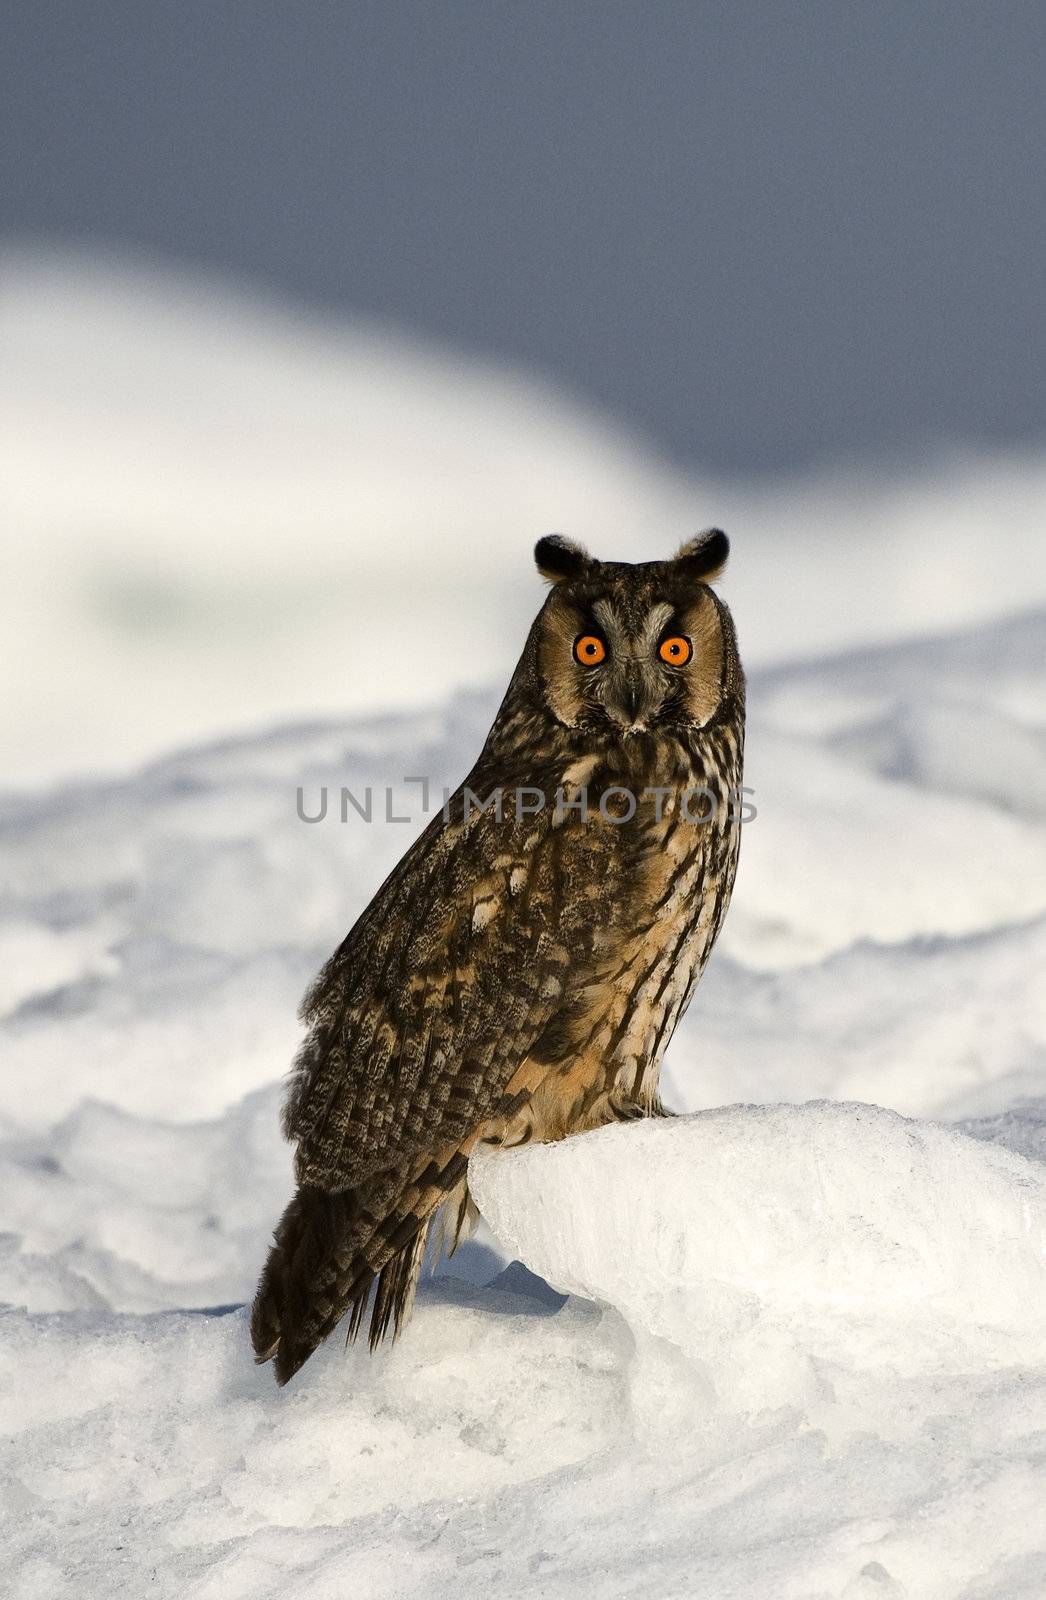 Asio otus. Russia. Ladoga Lake.The Long-eared Owl - Asio otus (previously: Strix otus) is a species of owl which breeds in Europe, Asia, and North America.